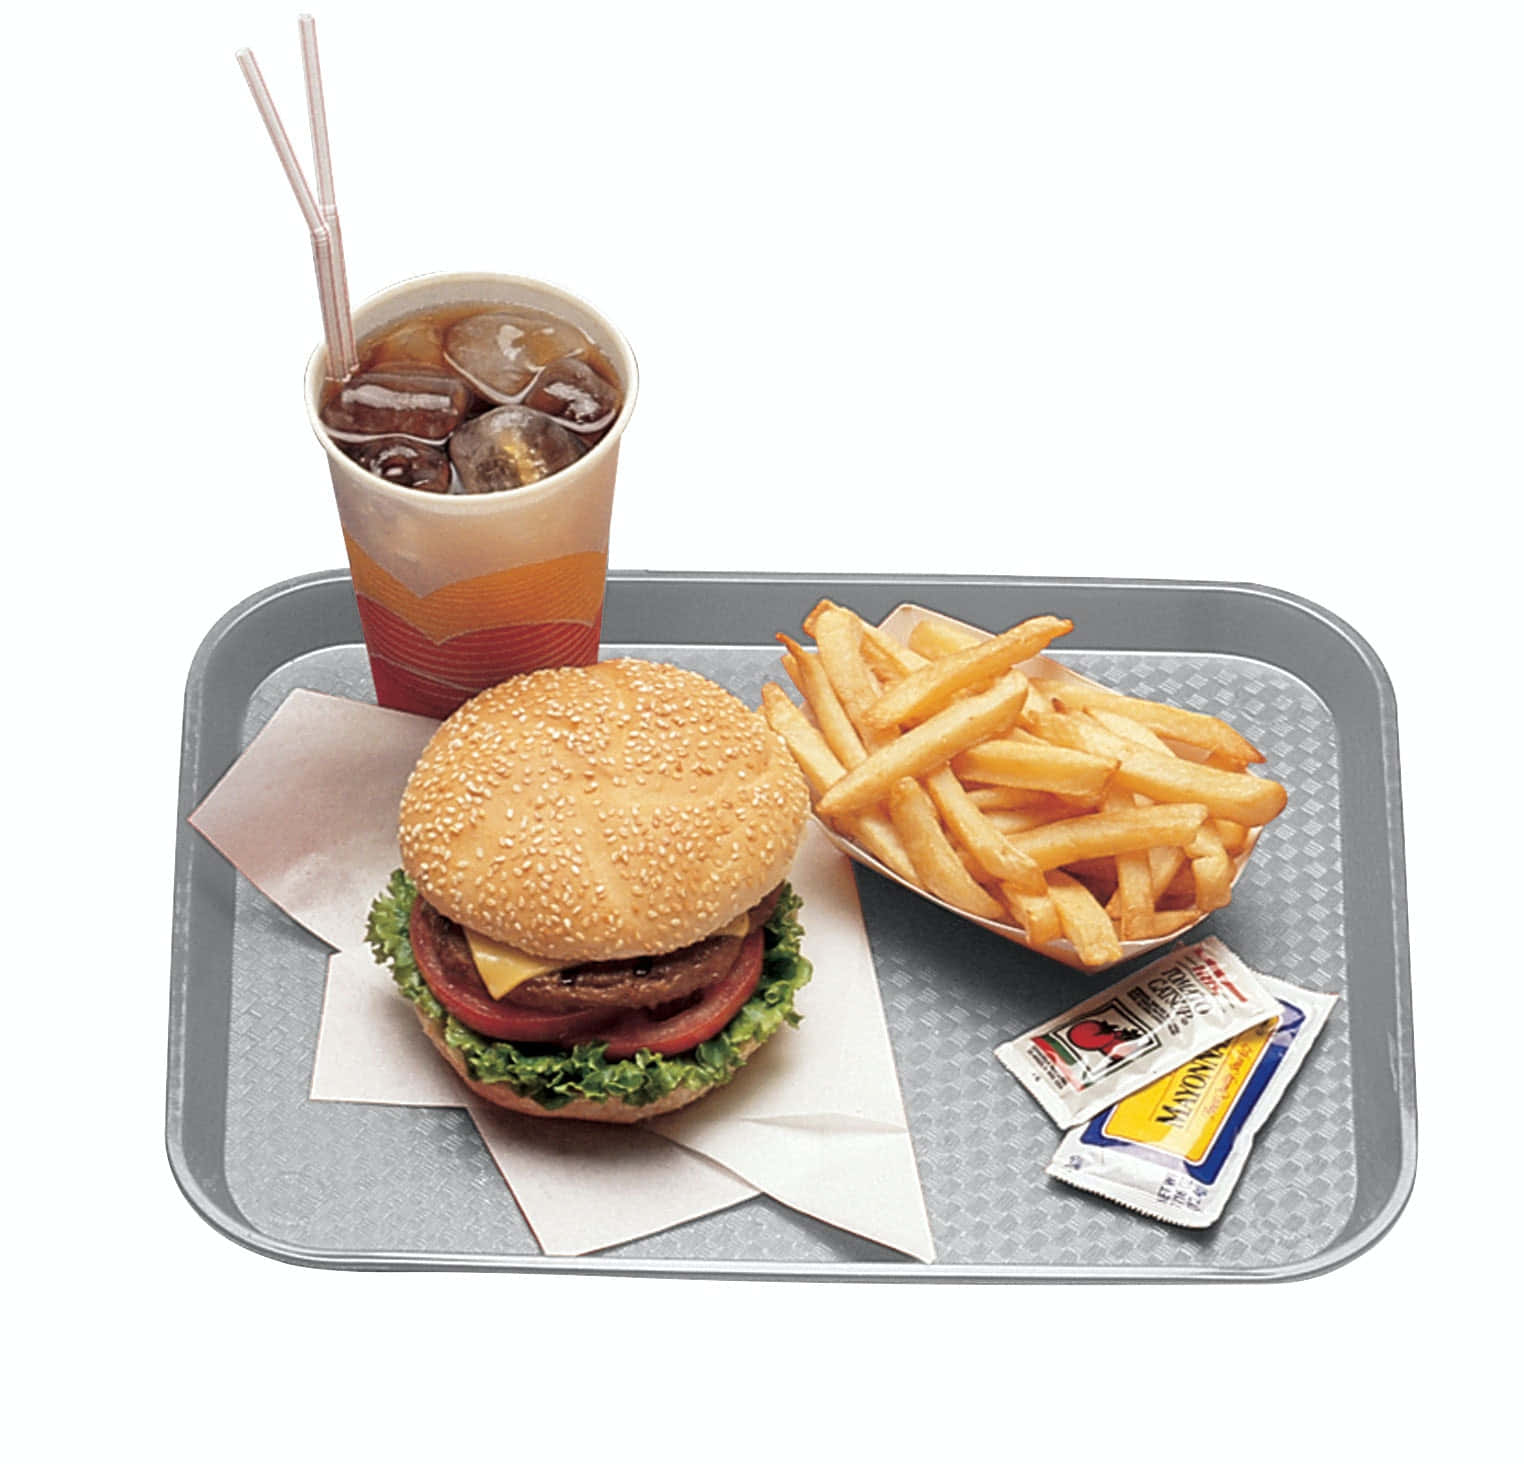 A Tray With A Hamburger, Fries And A Drink